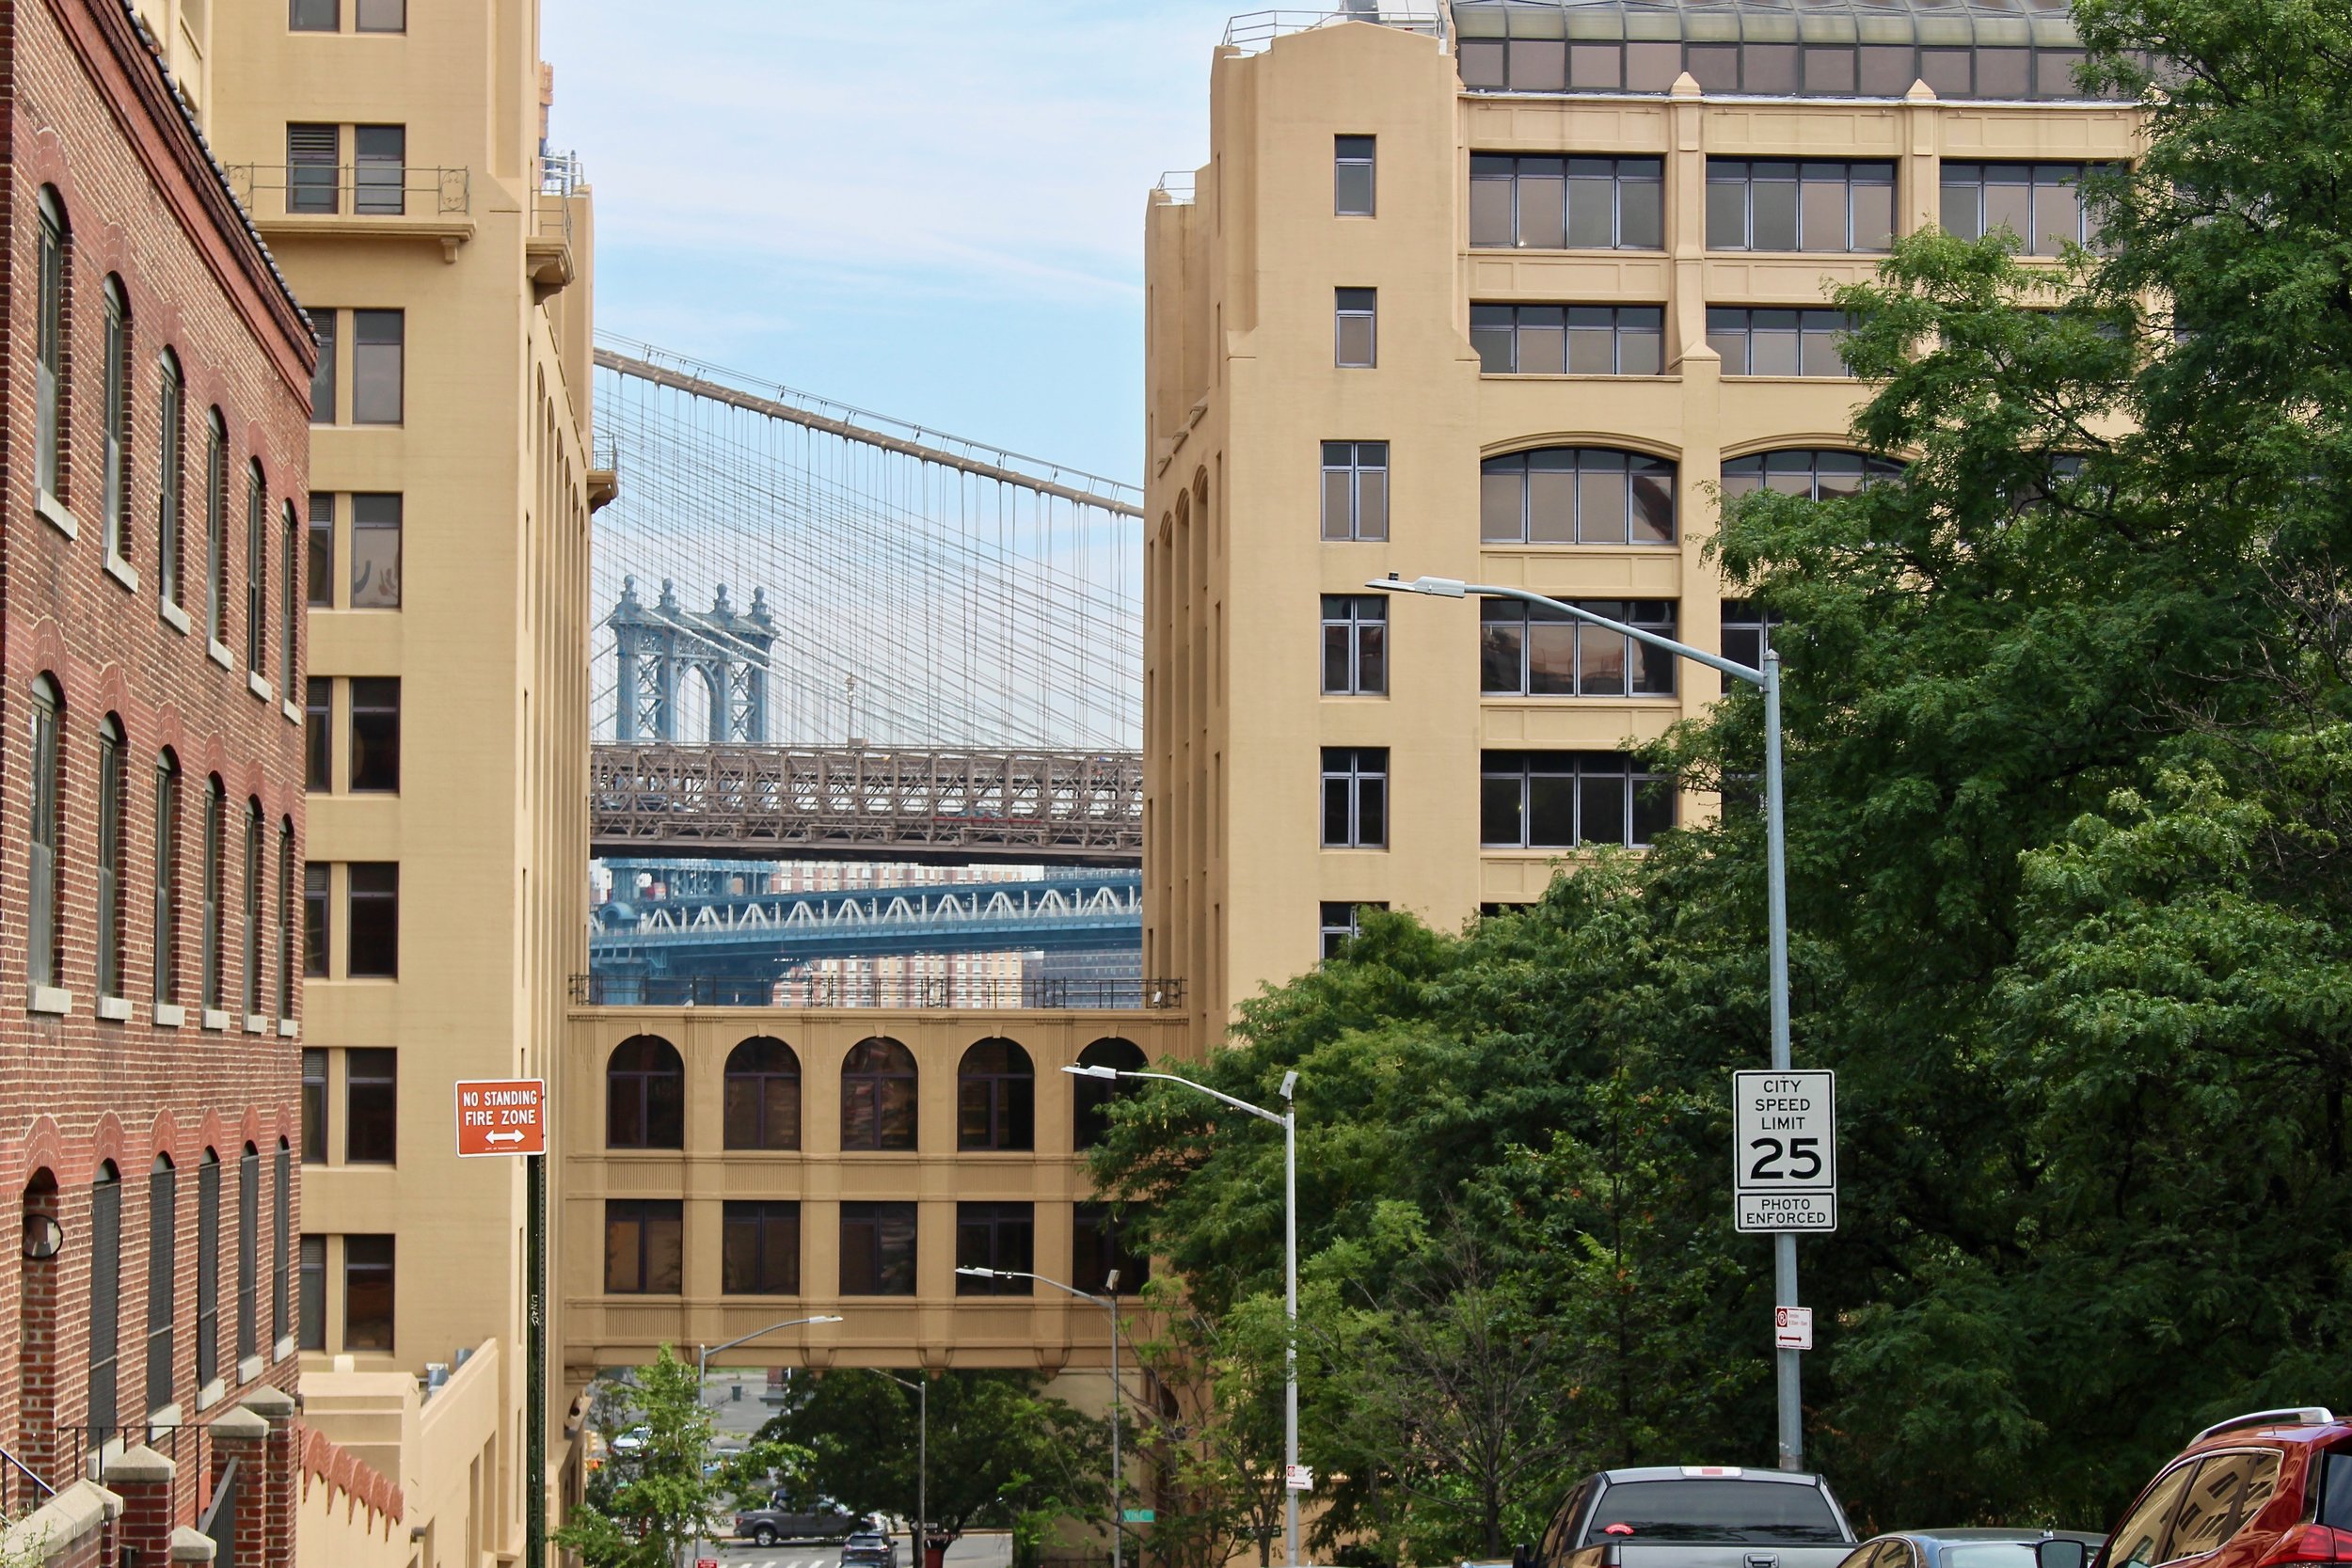  Starting out from Brooklyn Heights to DUMBO, at the Brooklyn Bridge Park footbridge.&nbsp; The view is downhill on Columbia Heights.&nbsp; Note the bridges in the background, a constant theme and anchor for our walk.&nbsp; The buildings you see in t